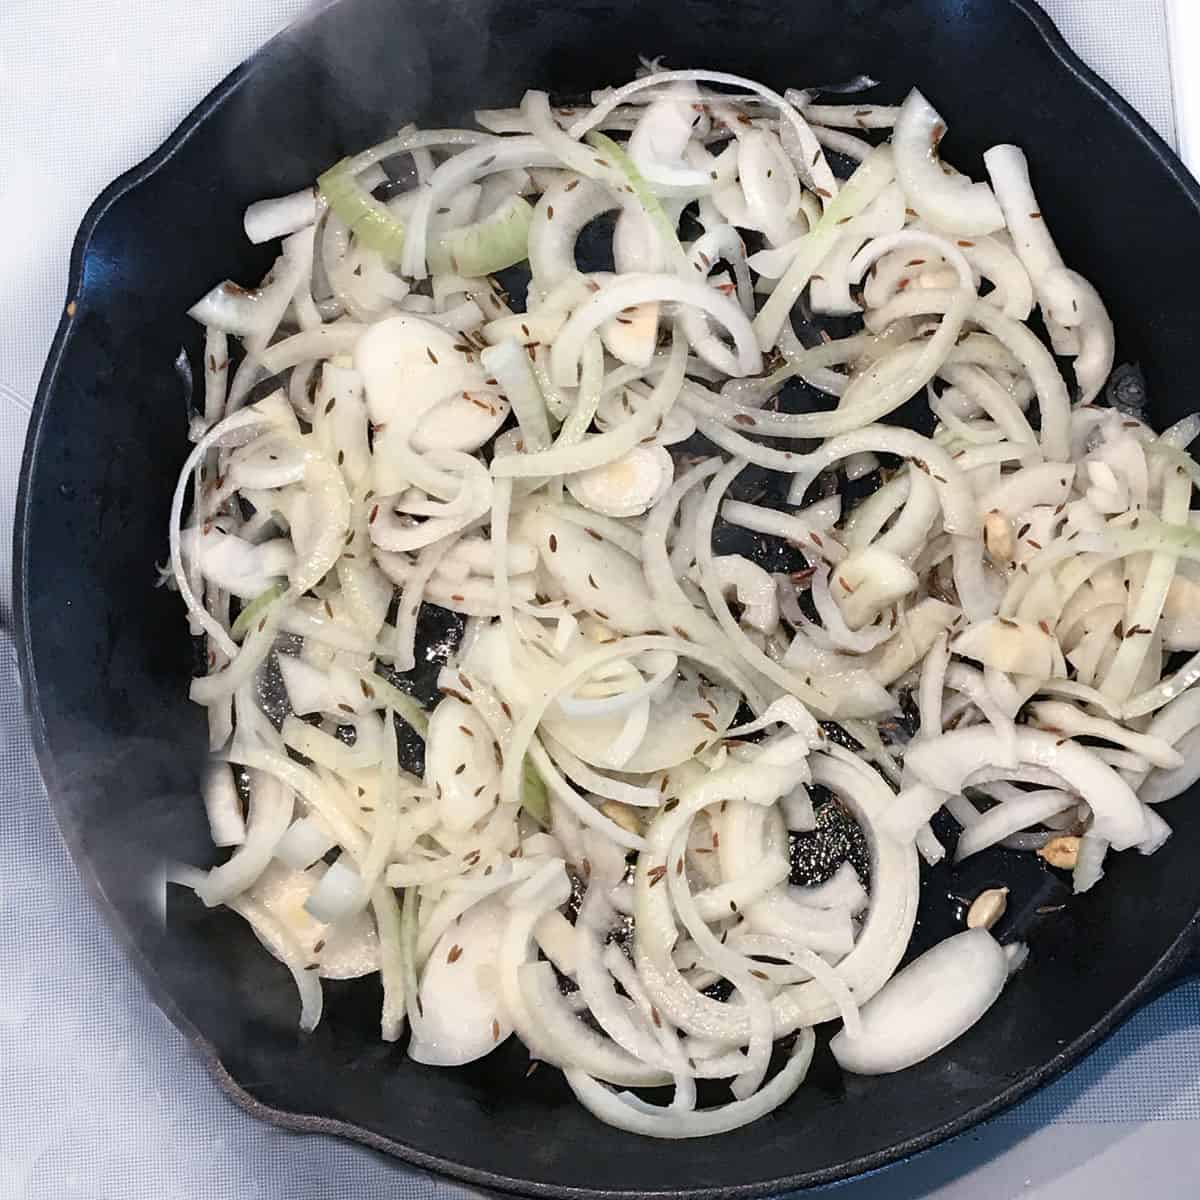 Sliced onions cooking in a cast iron skillet